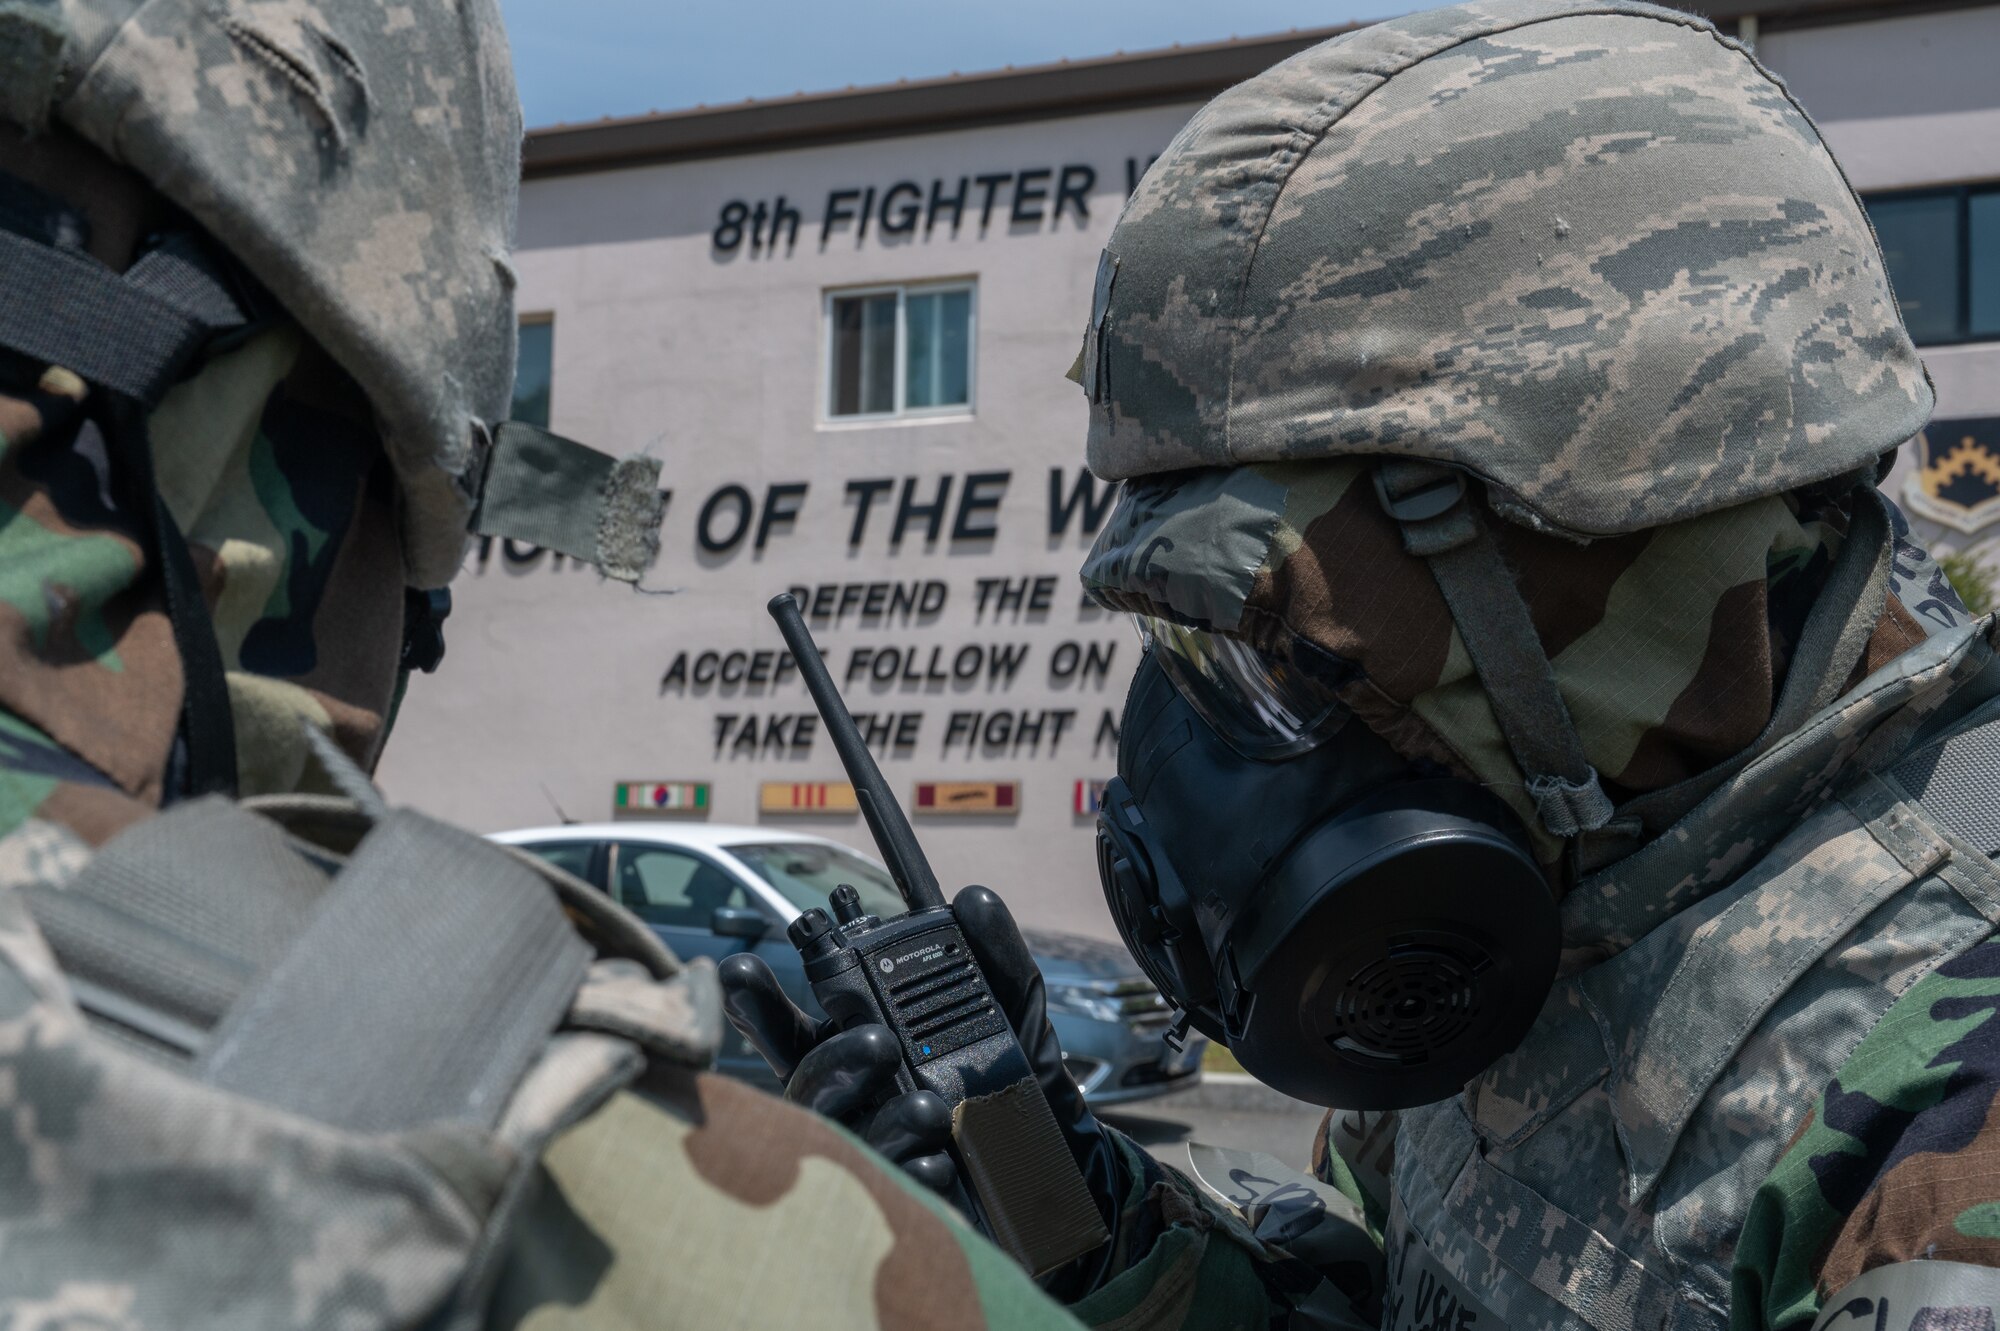 8th Fighter Wing protocol officer, radios a situation report in a simulated post-attack reconnaissance sweep during a training event at Kunsan Air Base